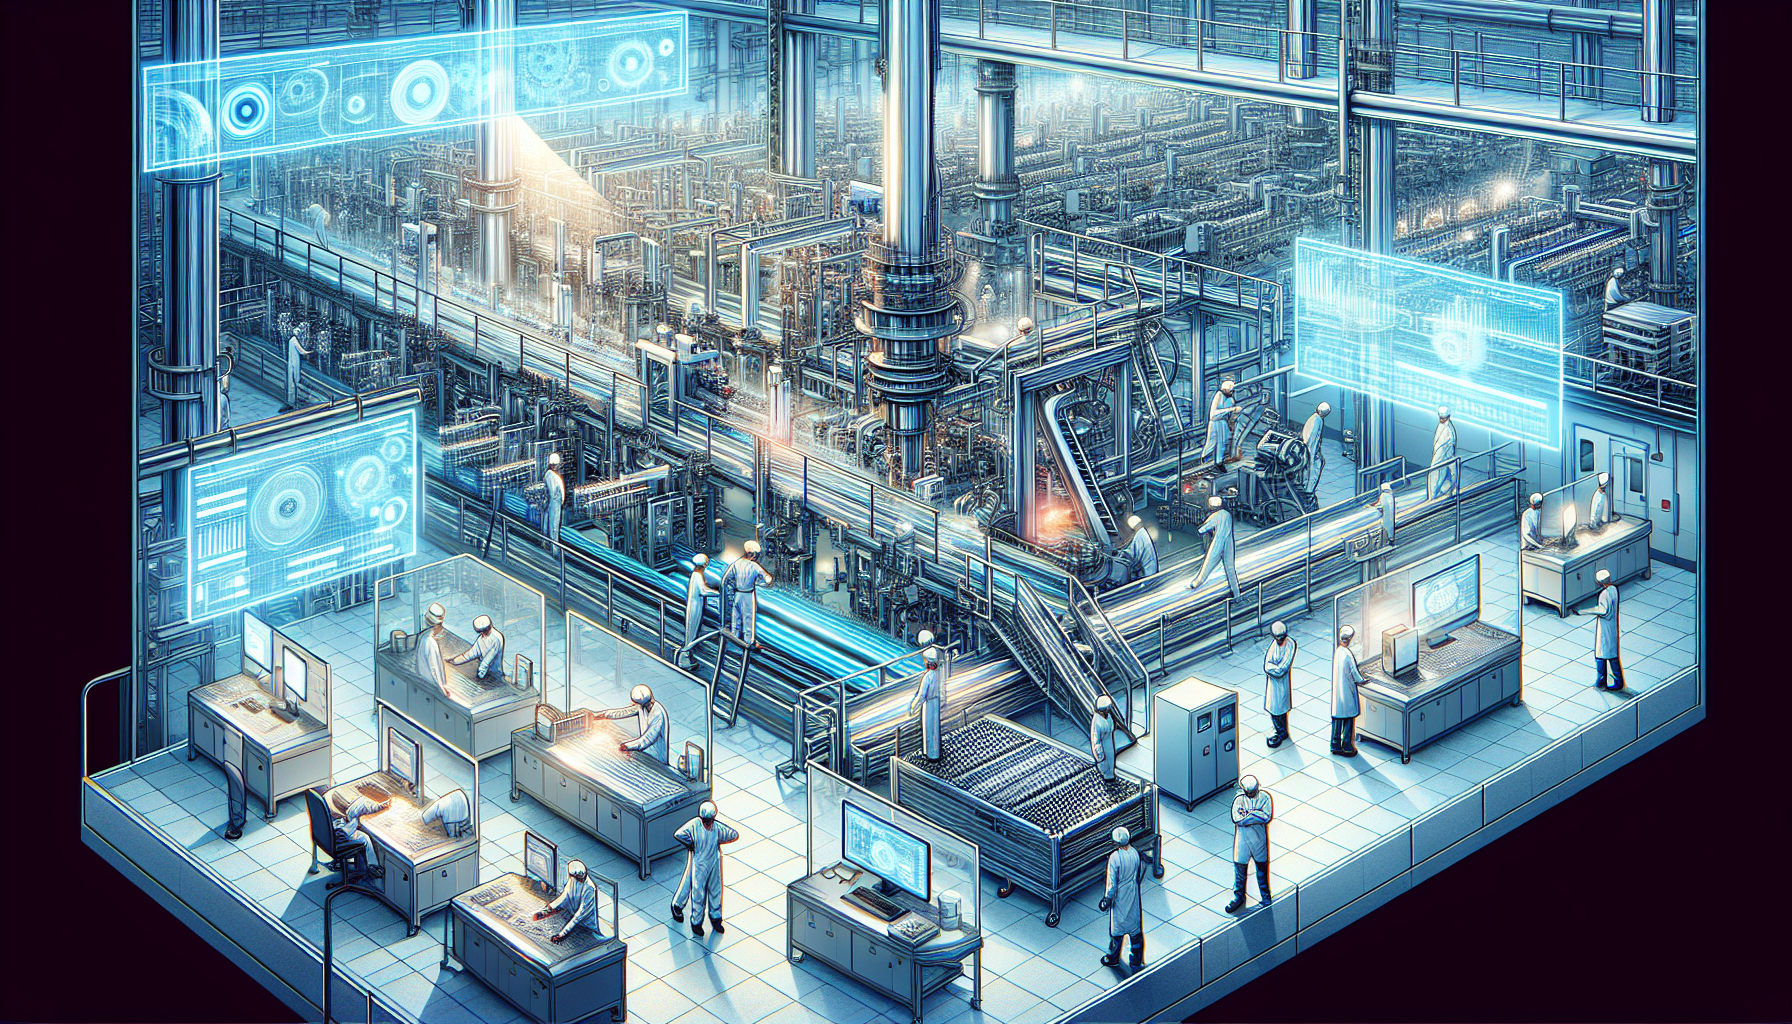 Illustration of a manufacturing plant with integrated MES software